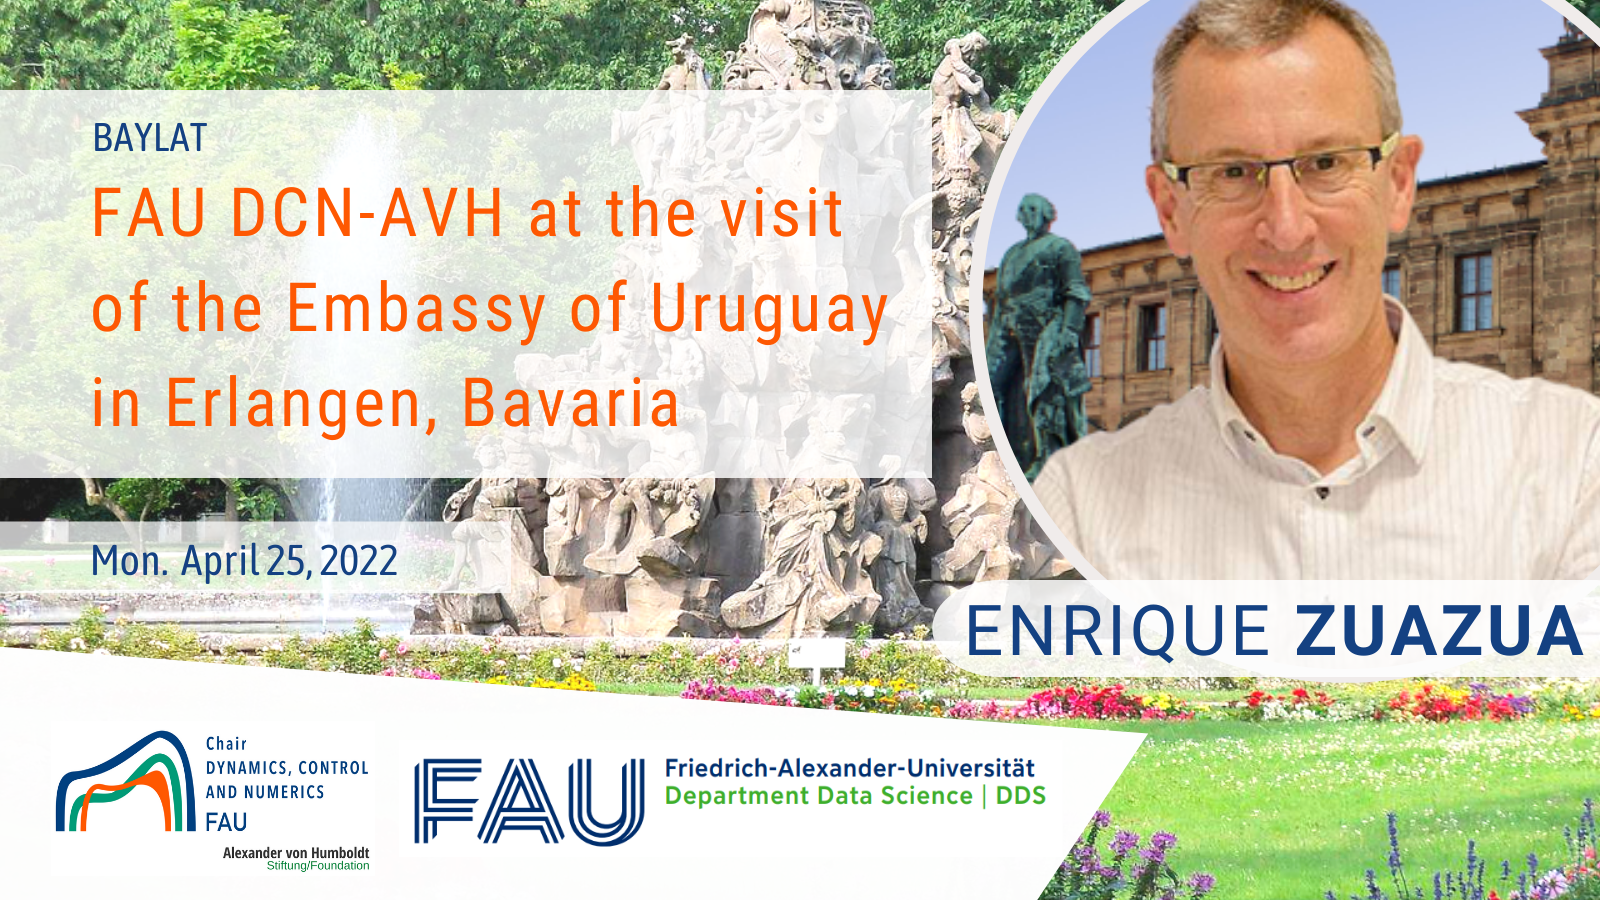 FAU DCN-AvH at the visit of the Embassy of Uruguay in Erlangen (BAYLAT)